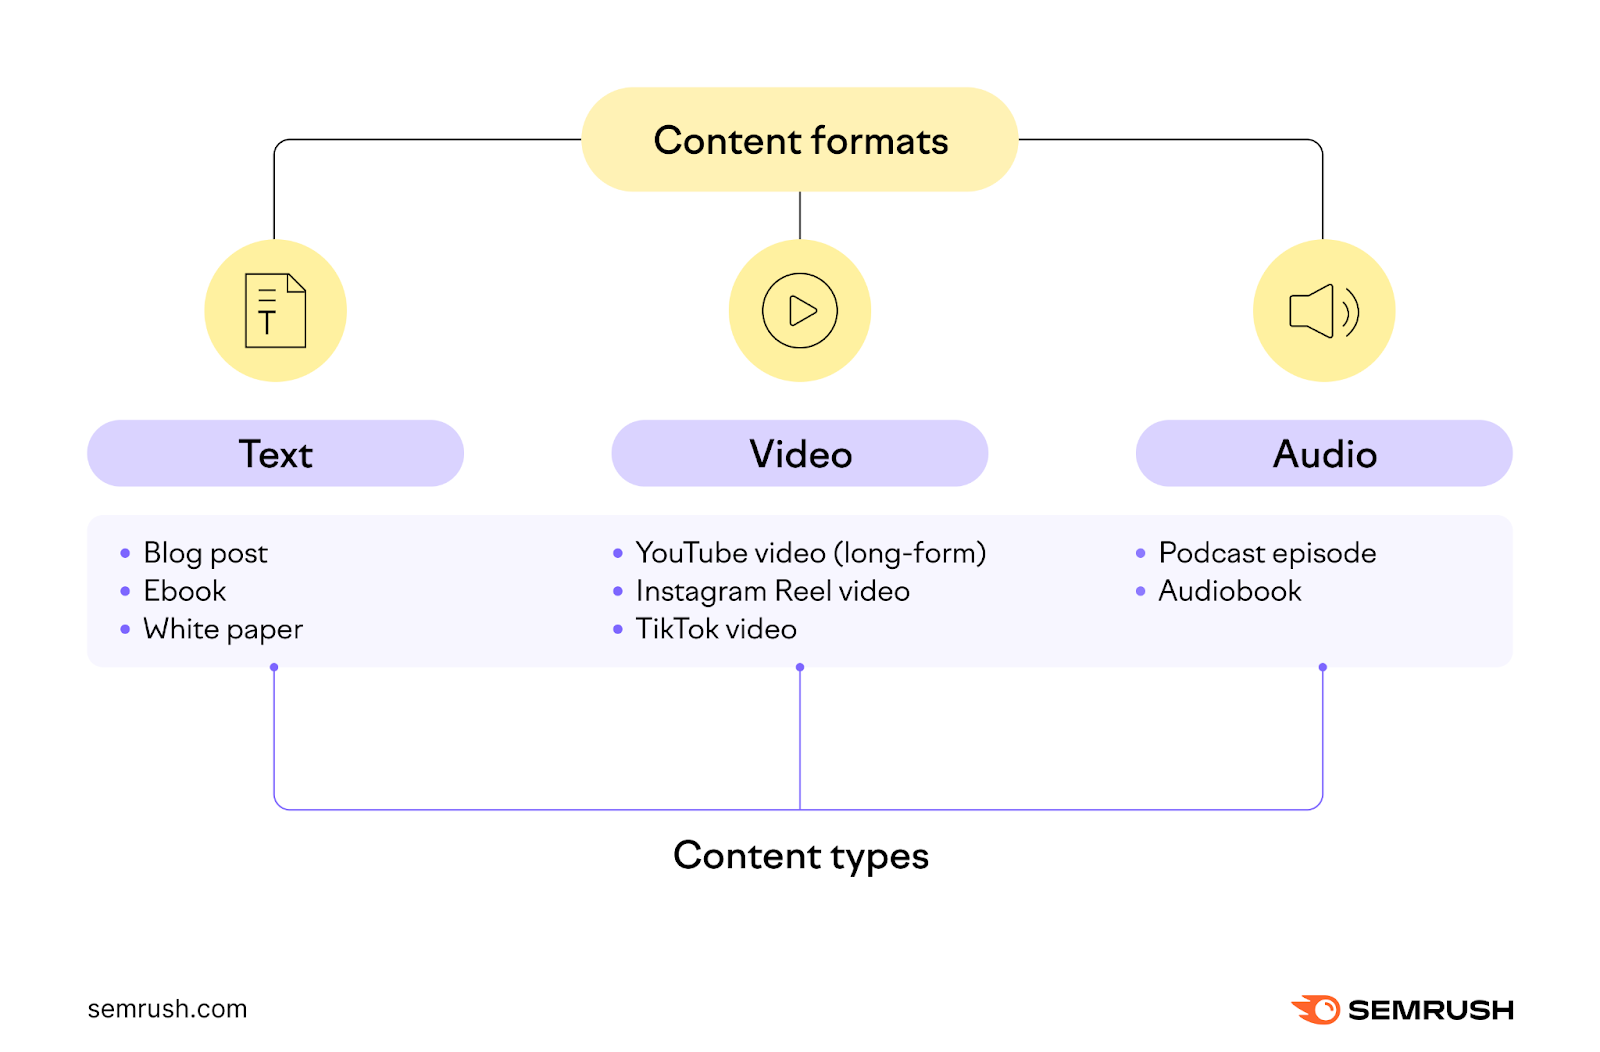 Content formats include text, video, and audio. Content types include blog post, ebook, white paper, YouTube video (long-form), Instagram Reel video, TikTok video, Podcast episode, and Audiobook.